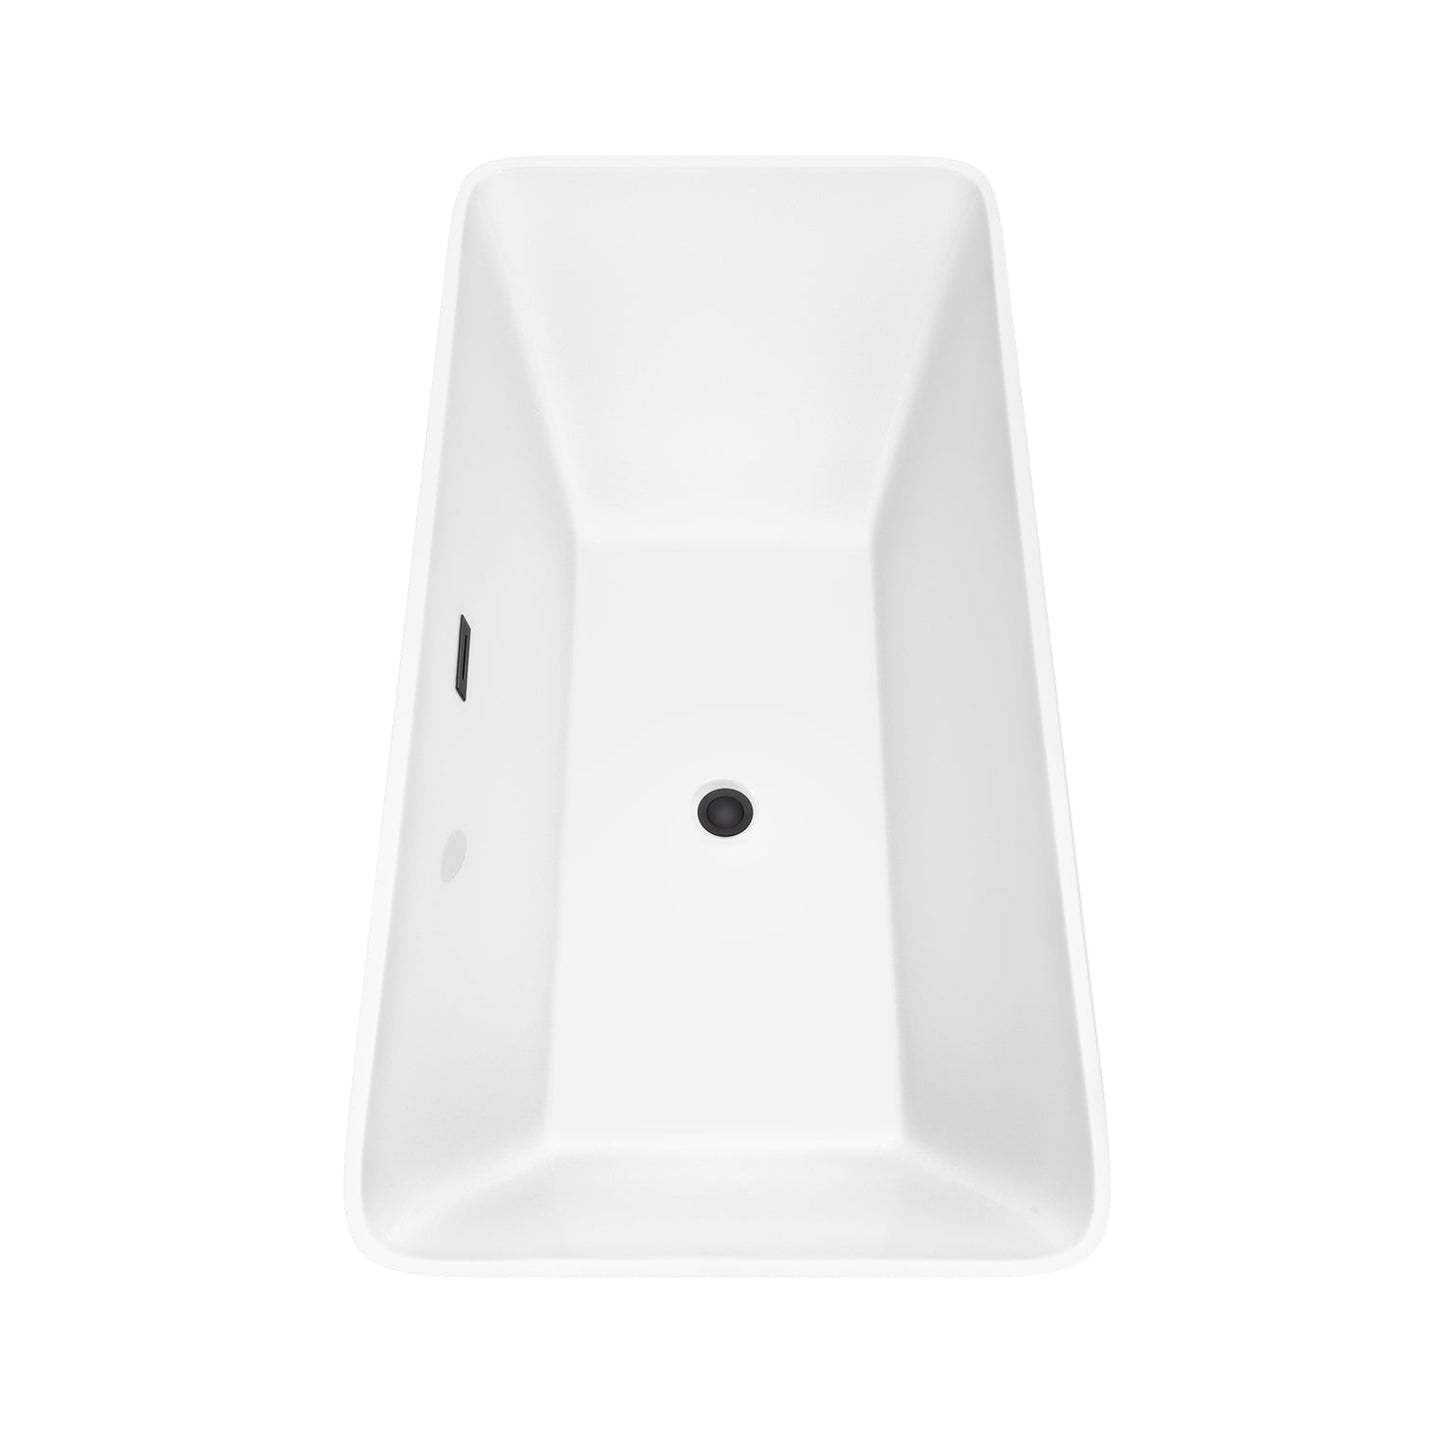 Wyndham Collection Tiffany 67" Freestanding Bathtub in White With Floor Mounted Faucet, Drain and Overflow Trim in Matte Black